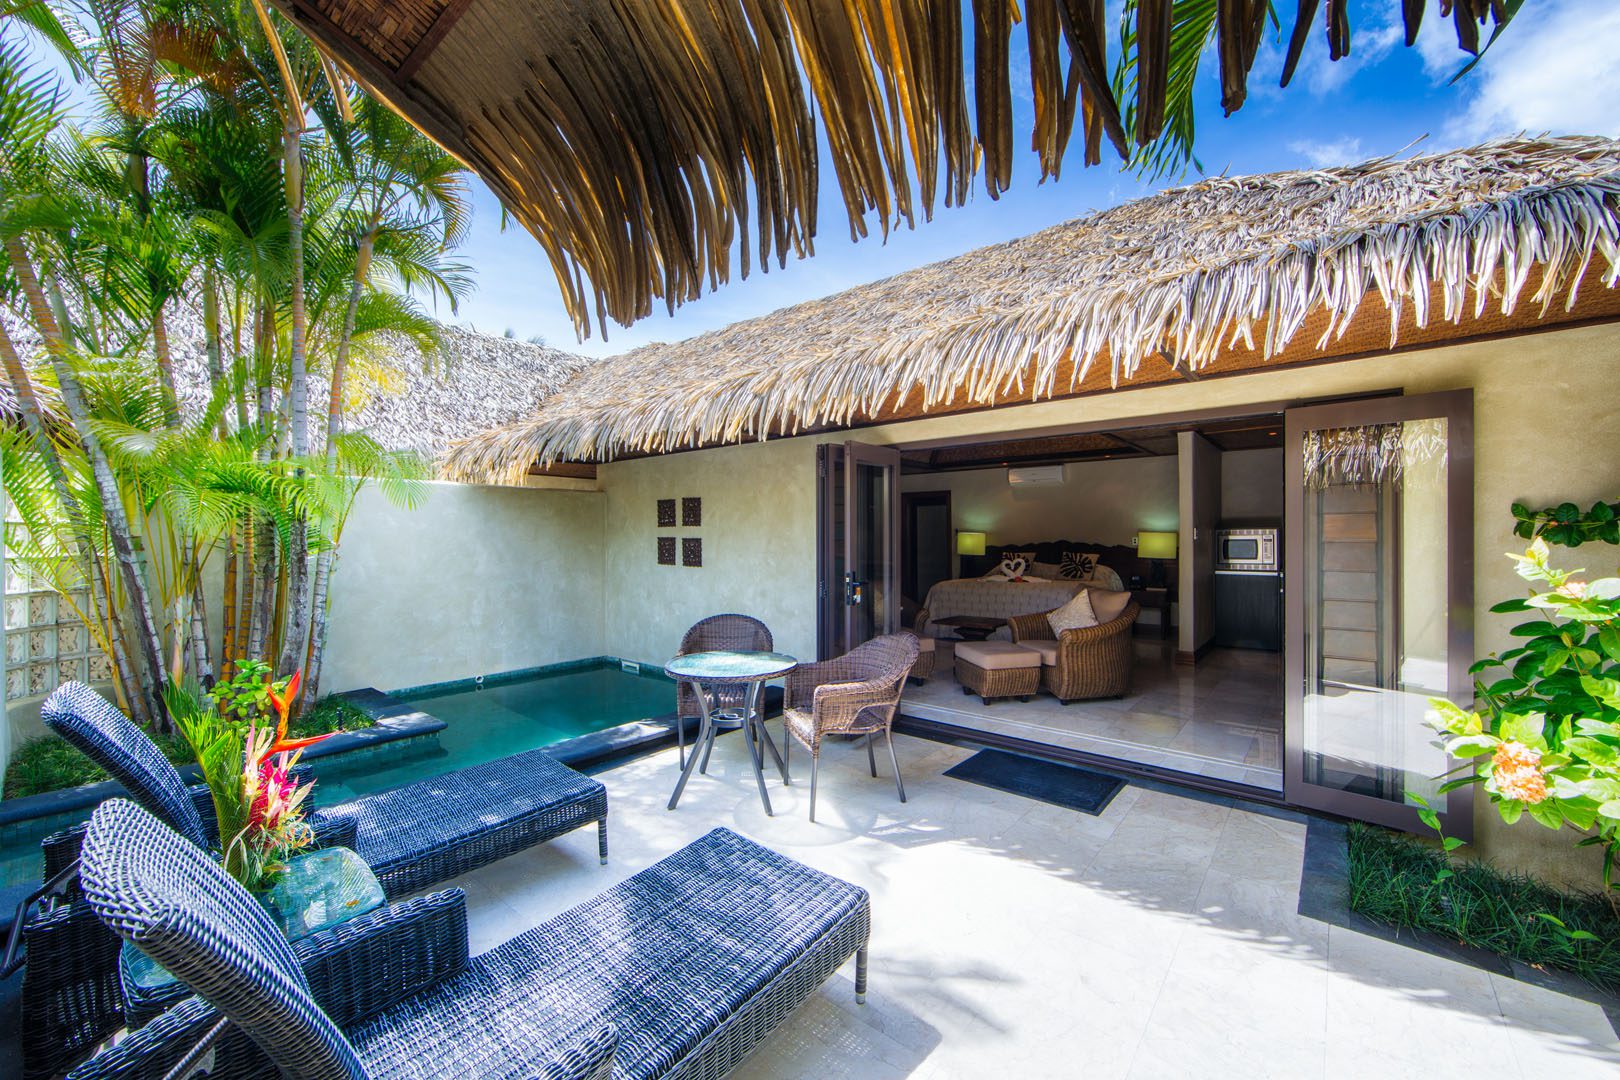 View from the tiled patio area with luxurious outdoor settings and private pool, looking into the Pool villa suite bedroom